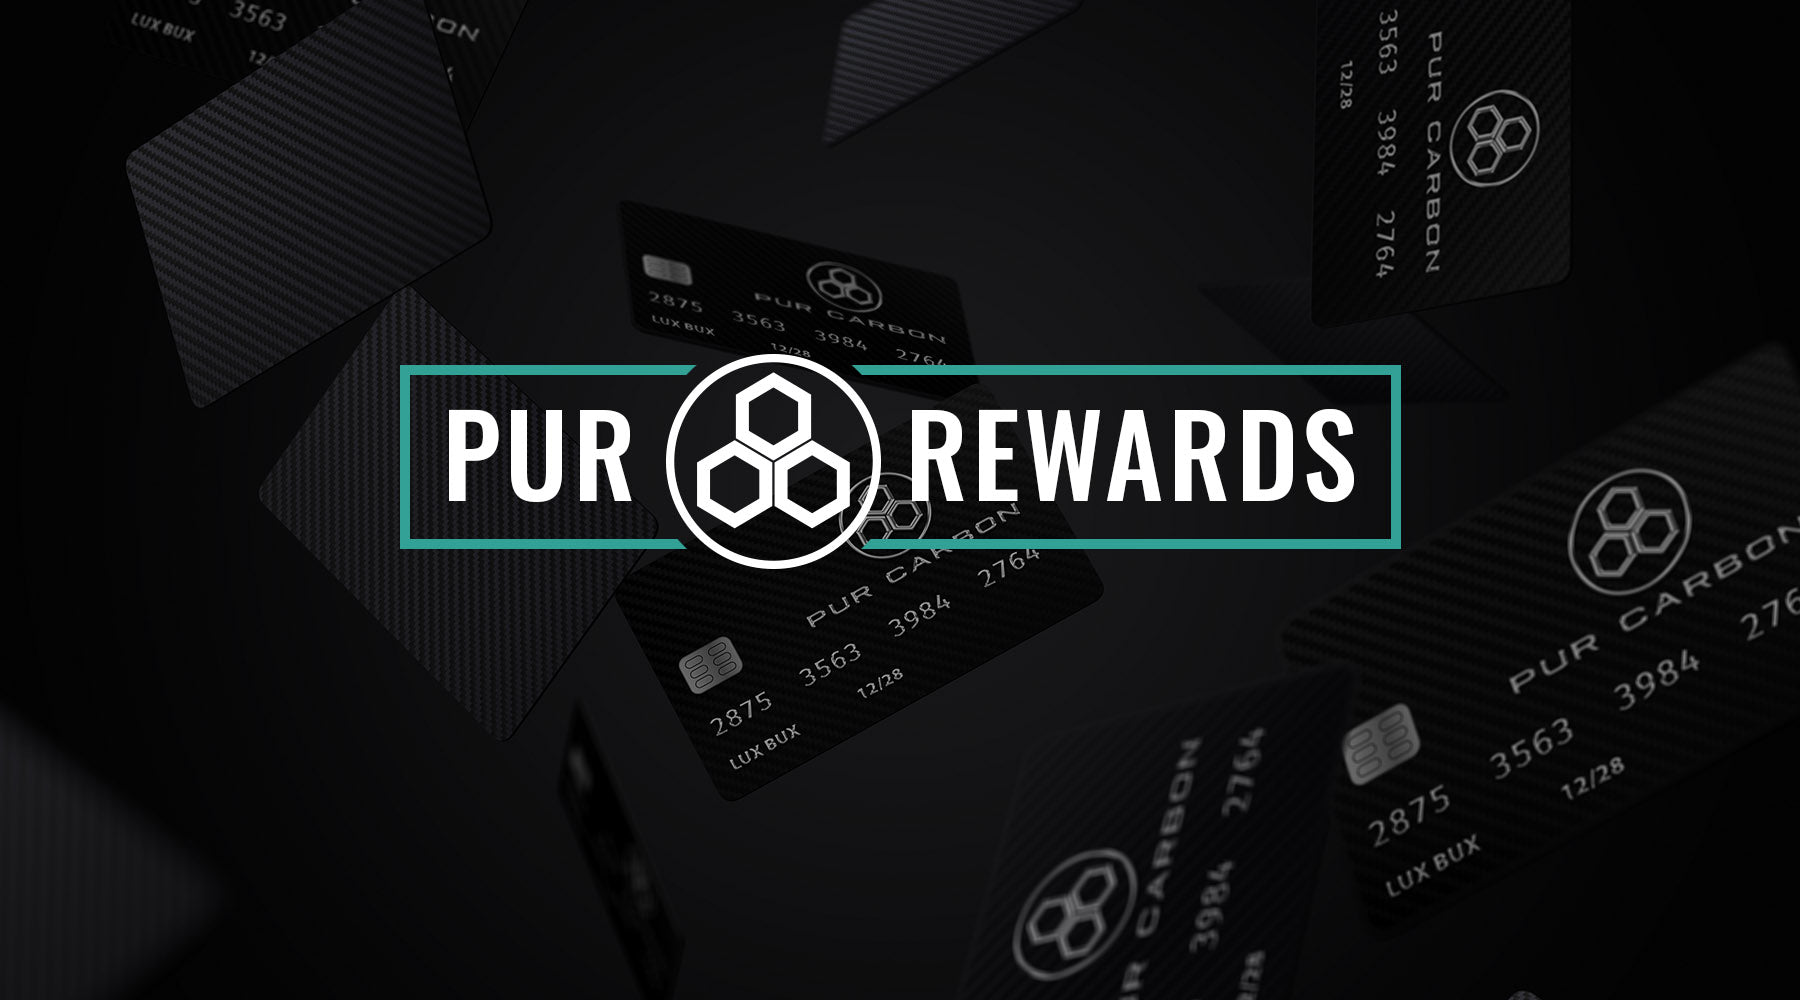 Pur Rewards pays generously for purchasing carbon fiber accessories with Lux Bux